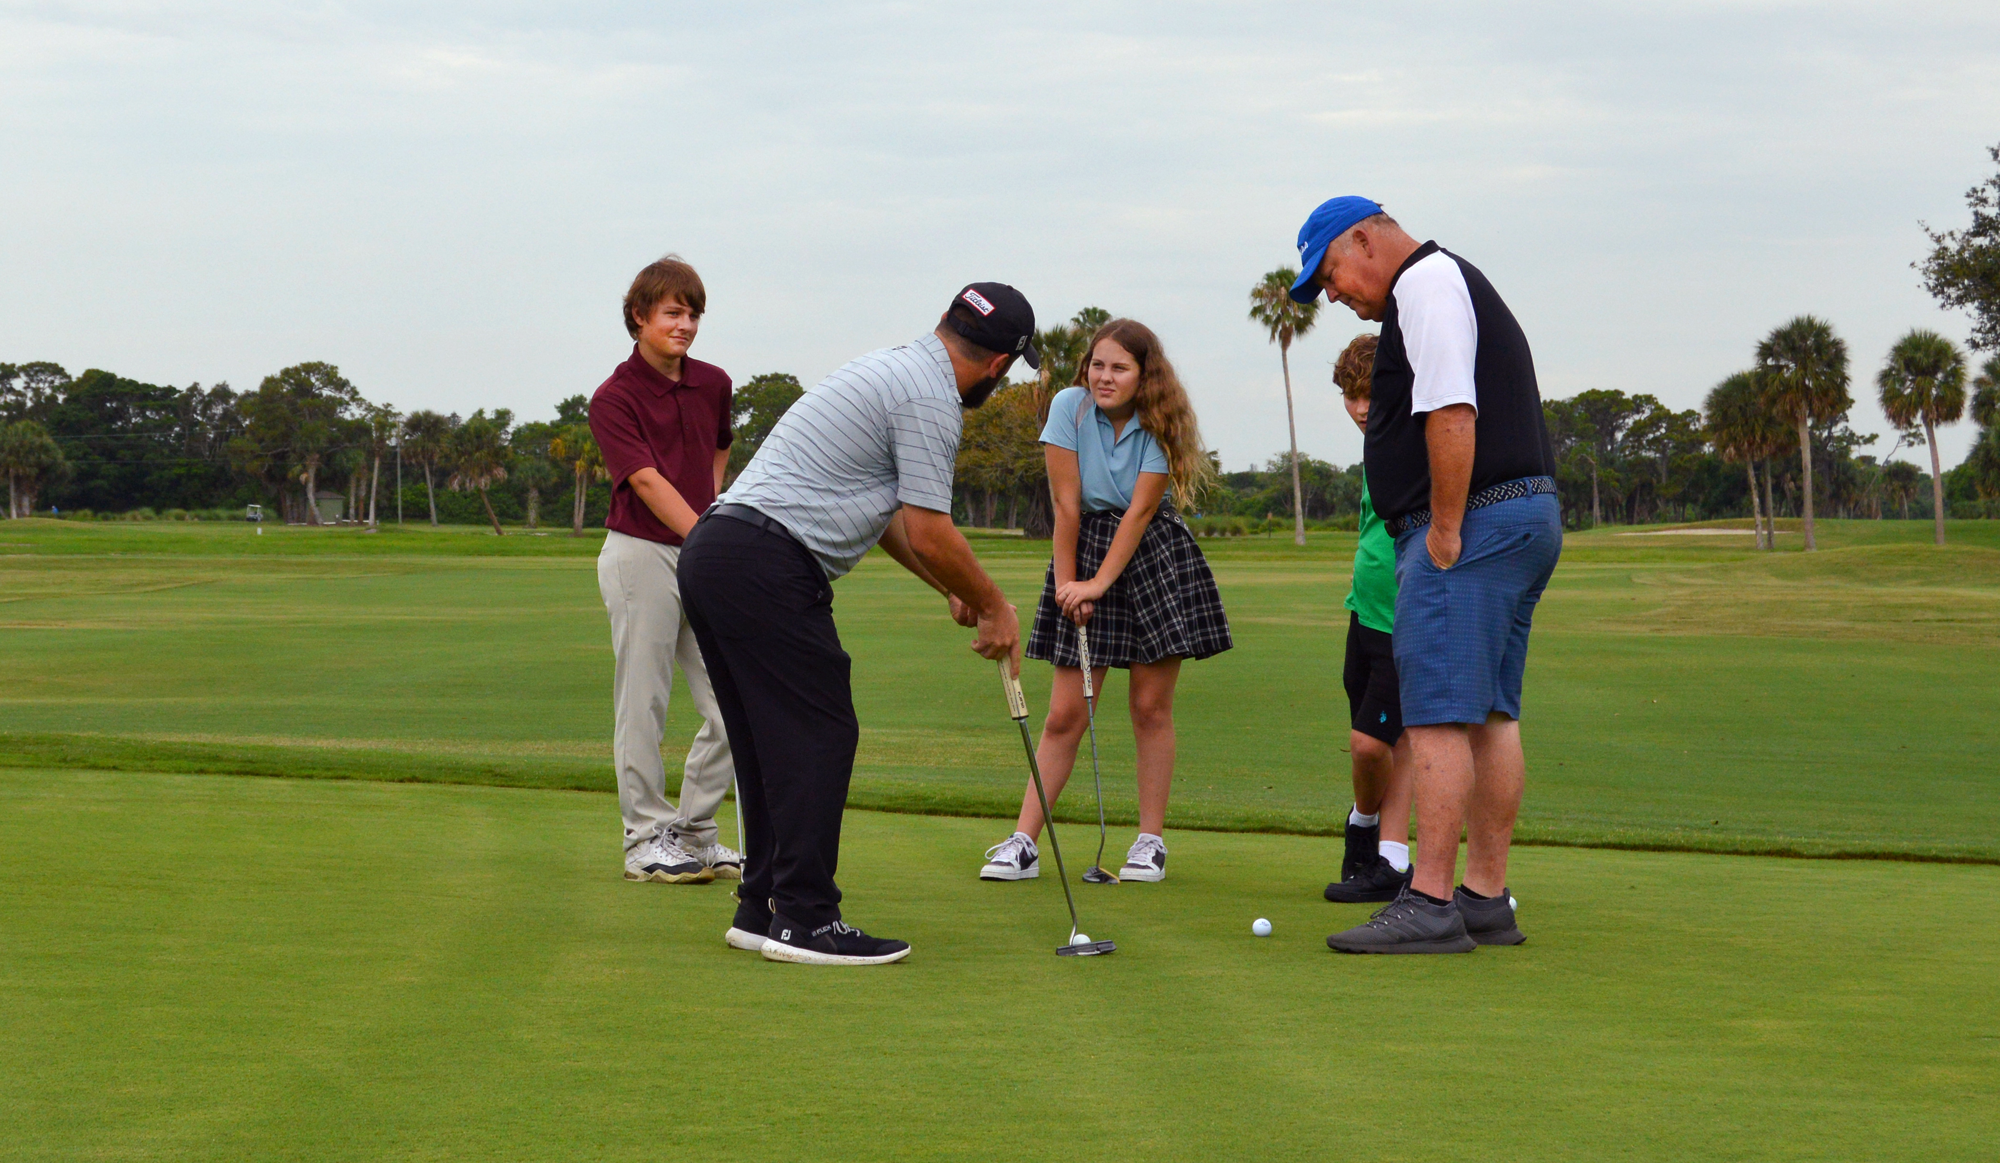 A family participating in golf lessons at Sailfish Sands Gold Course